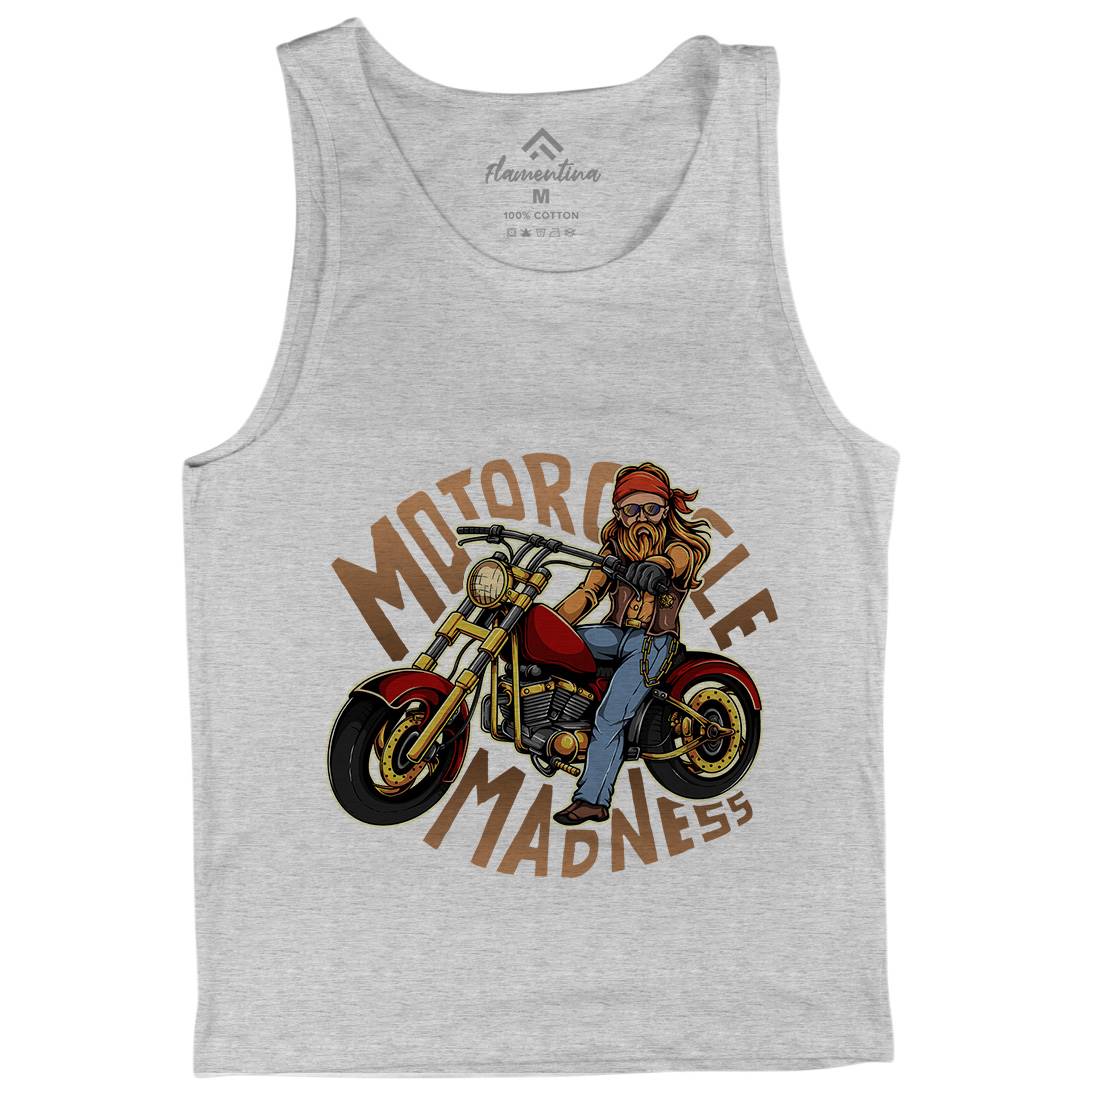 Madness Mens Tank Top Vest Motorcycles A438